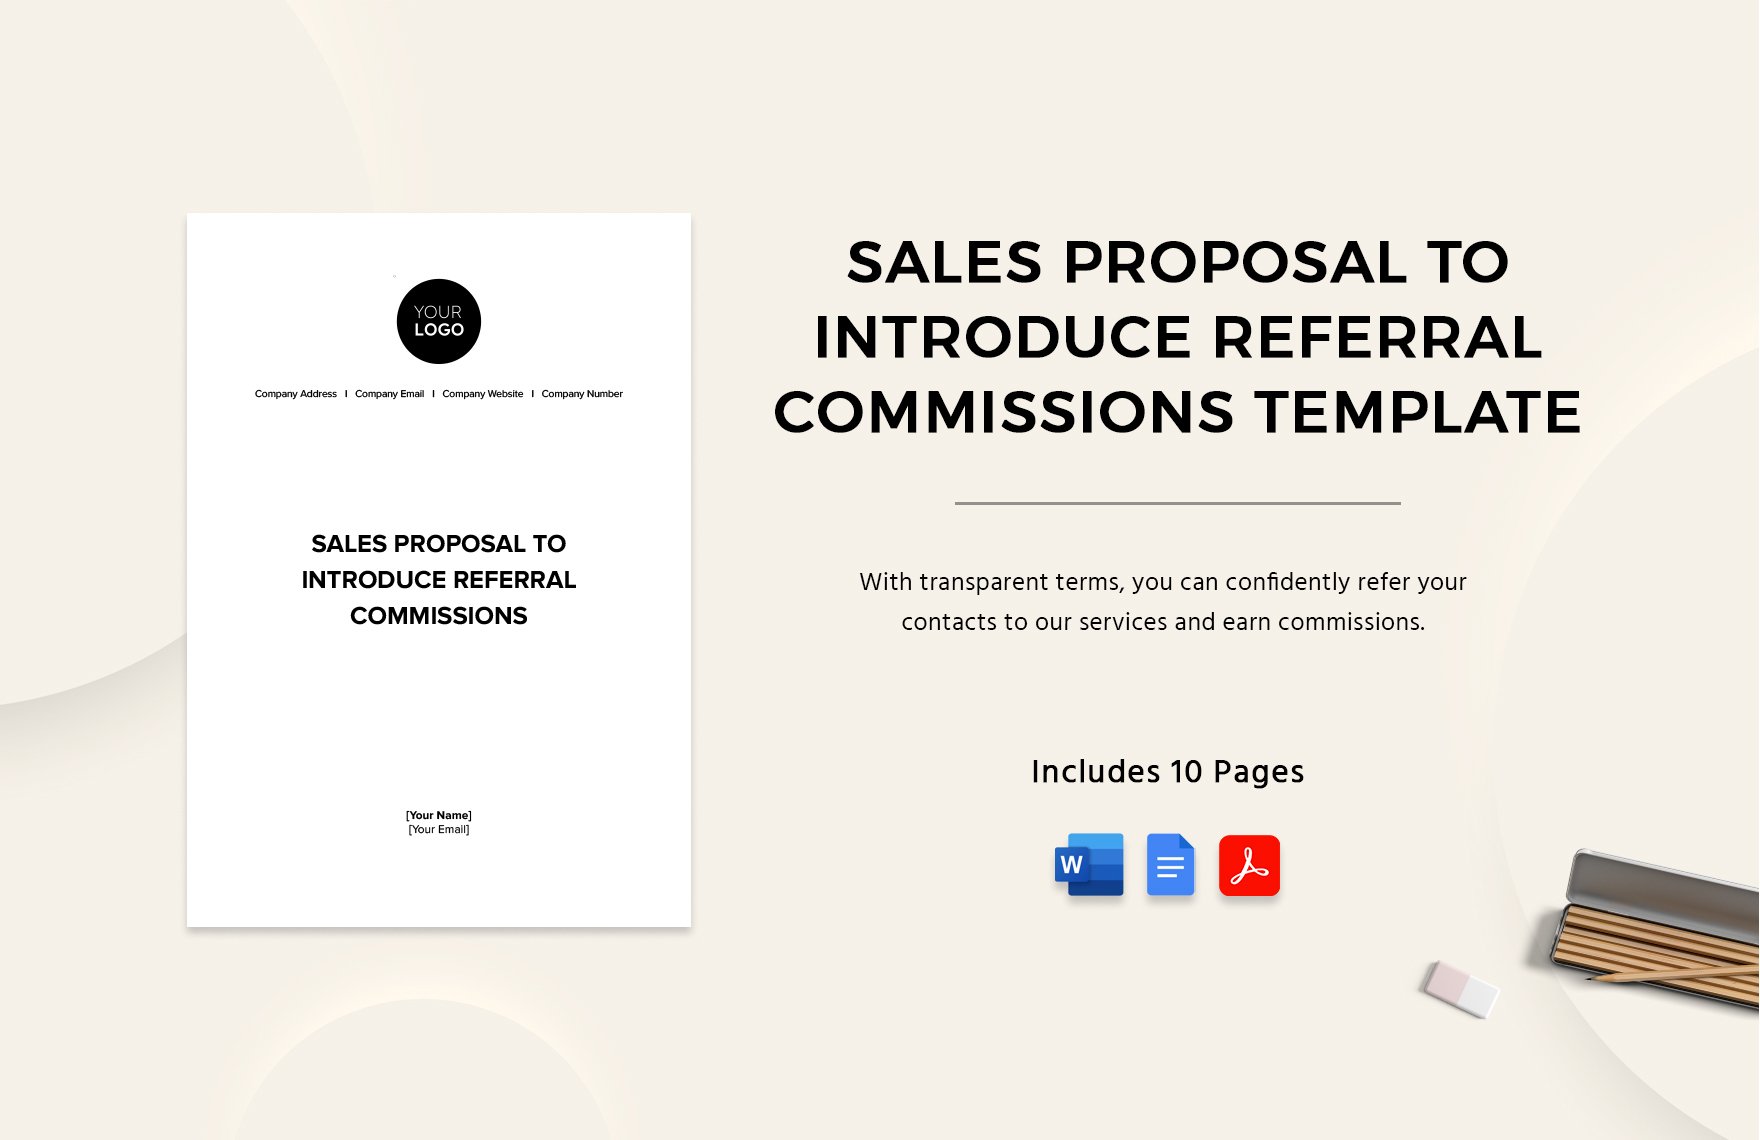 Sales Proposal to Introduce Referral Commissions Template in Word, Google Docs, PDF